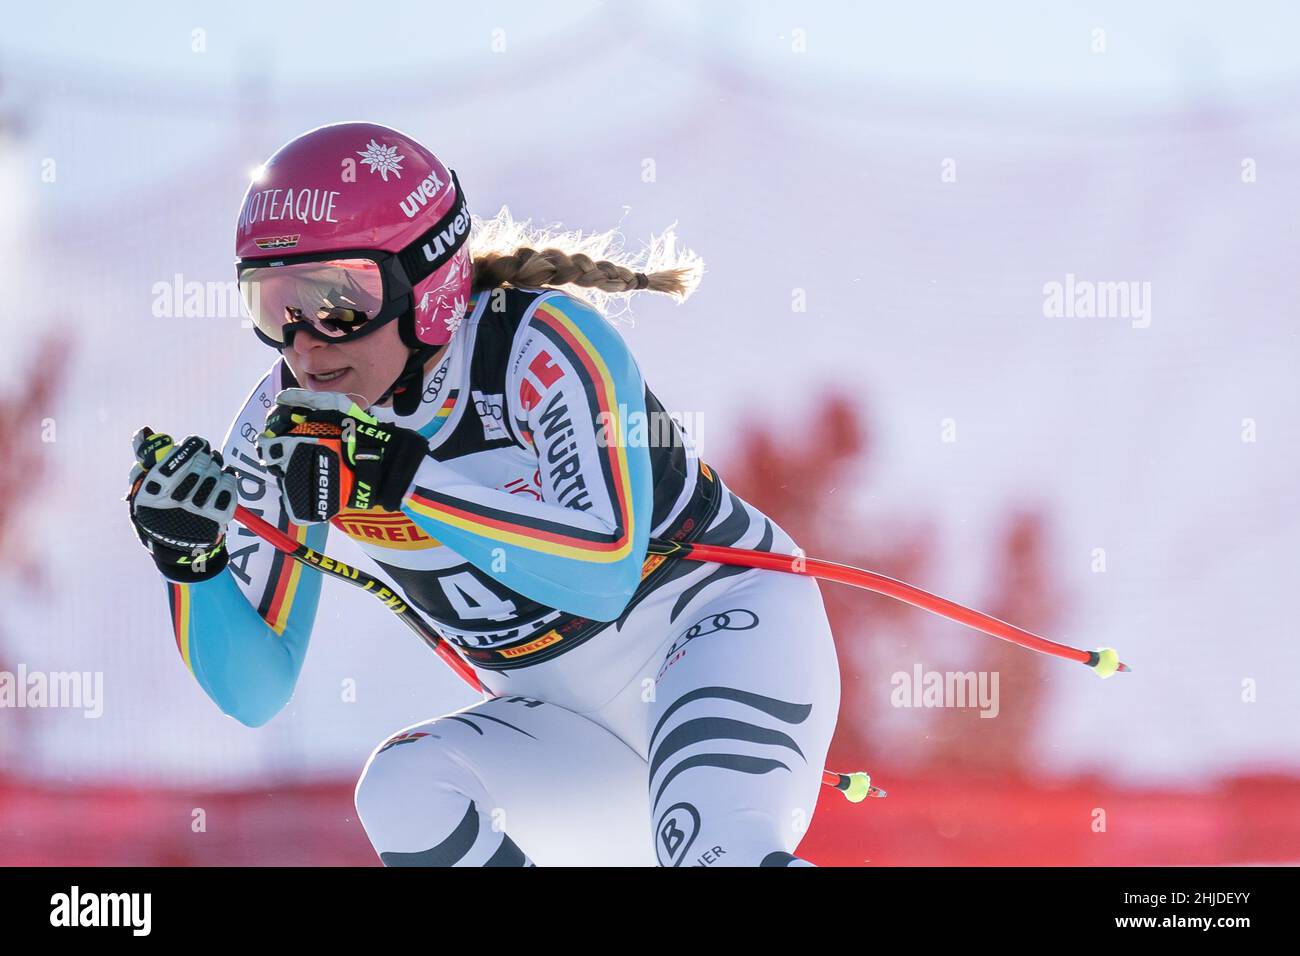 Cortina d'Ampezzo, Italy. 22 January 2022. HIRTL-STANGGASSINGER Katrin (GER) Ski World Cup Women's Downhill on the Olympia delle Tofane. Stock Photo